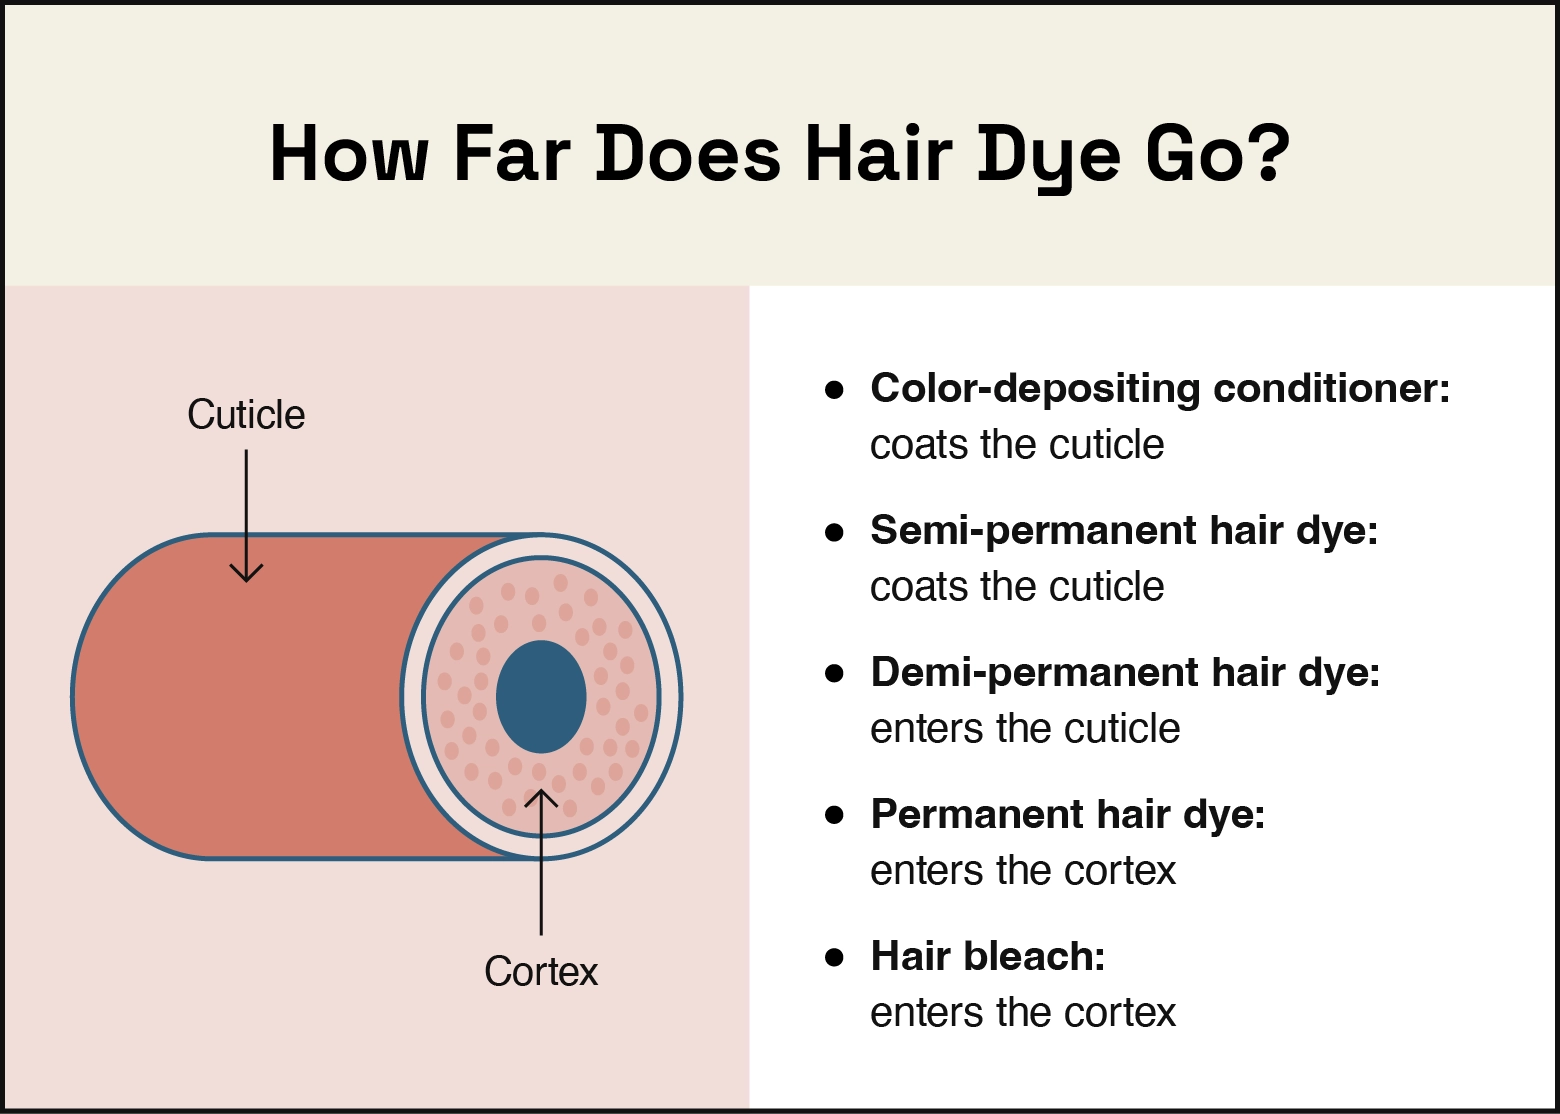 Color depositing conditioner and semi-permanent hair dye coat the cuticle of your hair strands. Demi-permanent hair dye coats and enters the cuticle of your hair strands. Permanent hair dye and bleach enters the cortex.